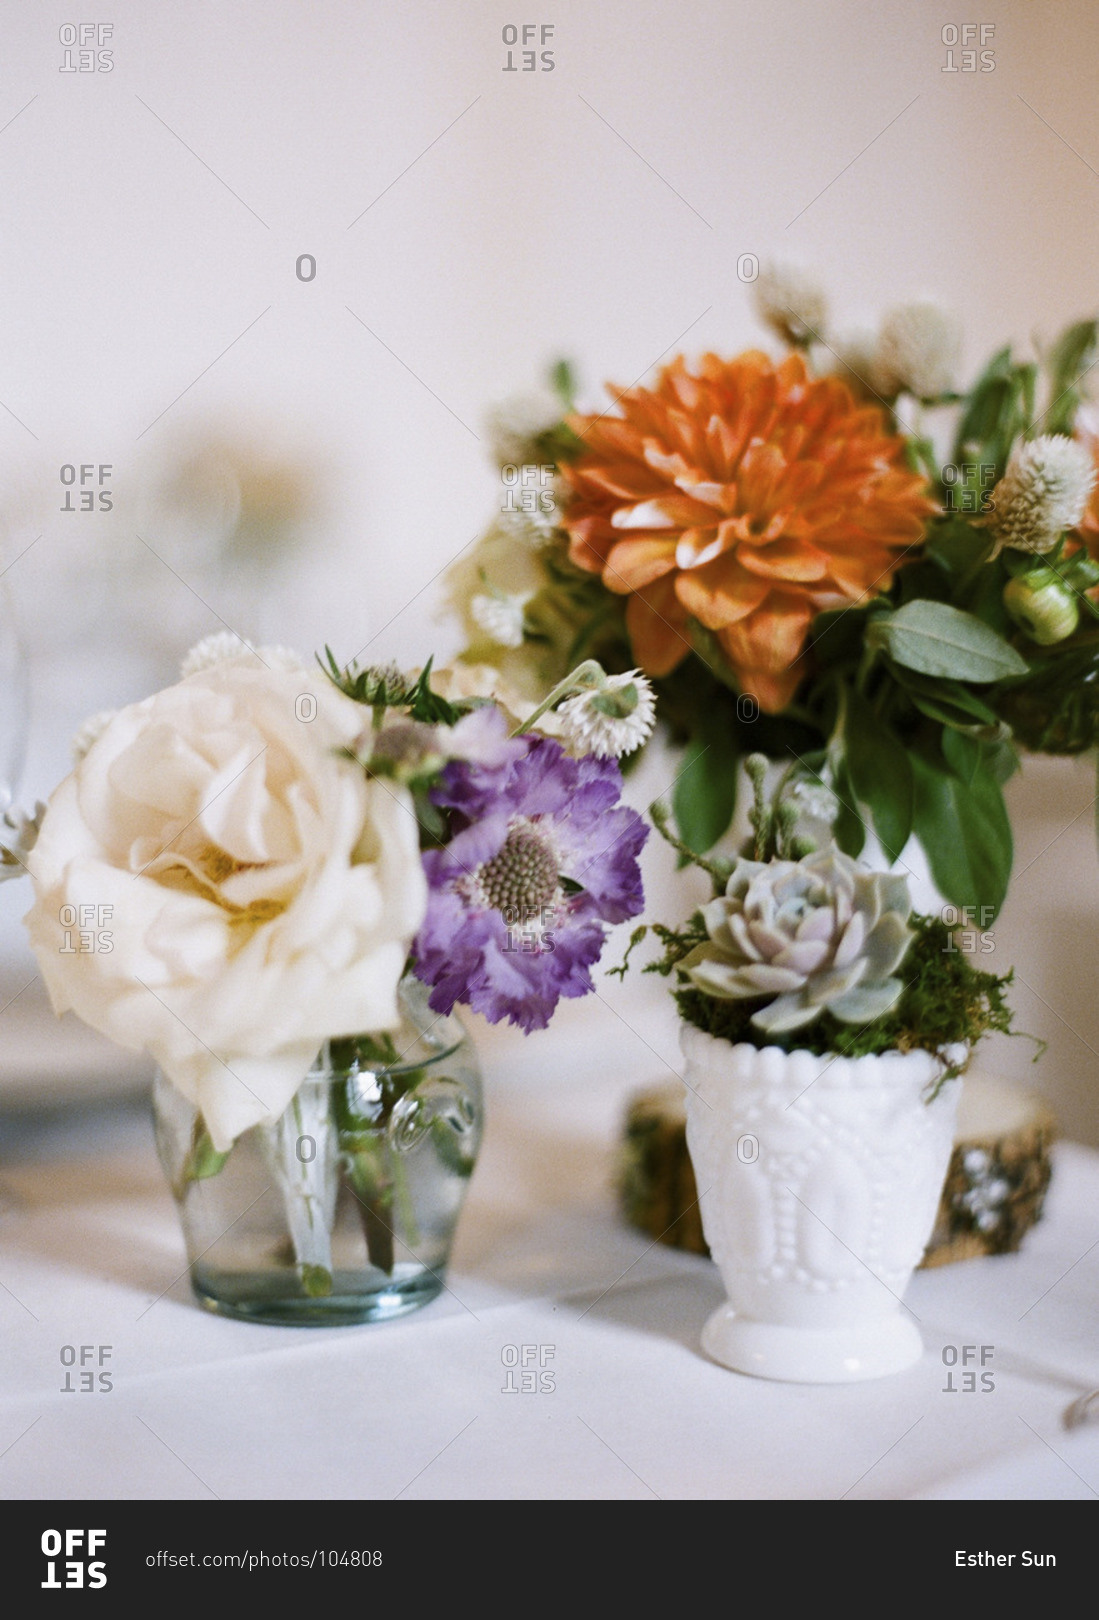 Floral centerpieces on wedding table